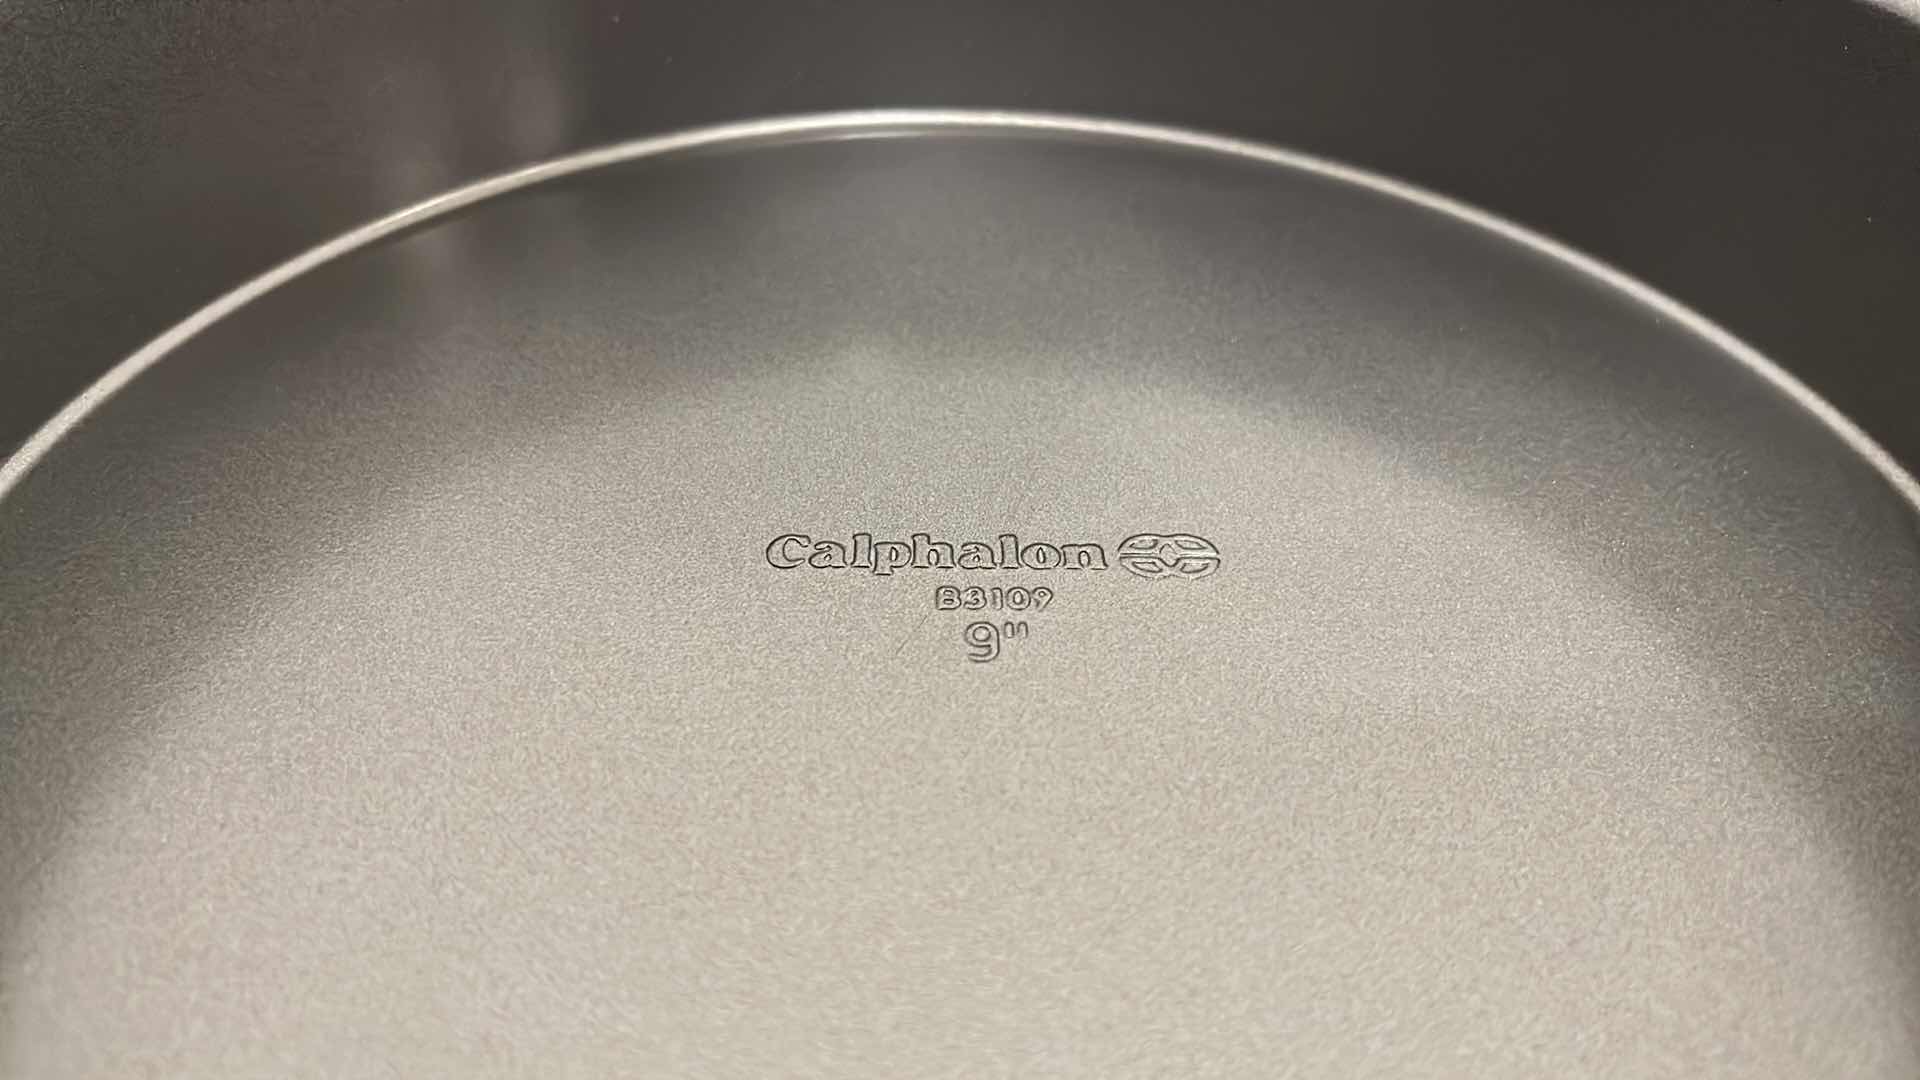 Photo 5 of CALPHALON 9” ROUND BAKING PANS (2) & STORAGE CONTAINERS